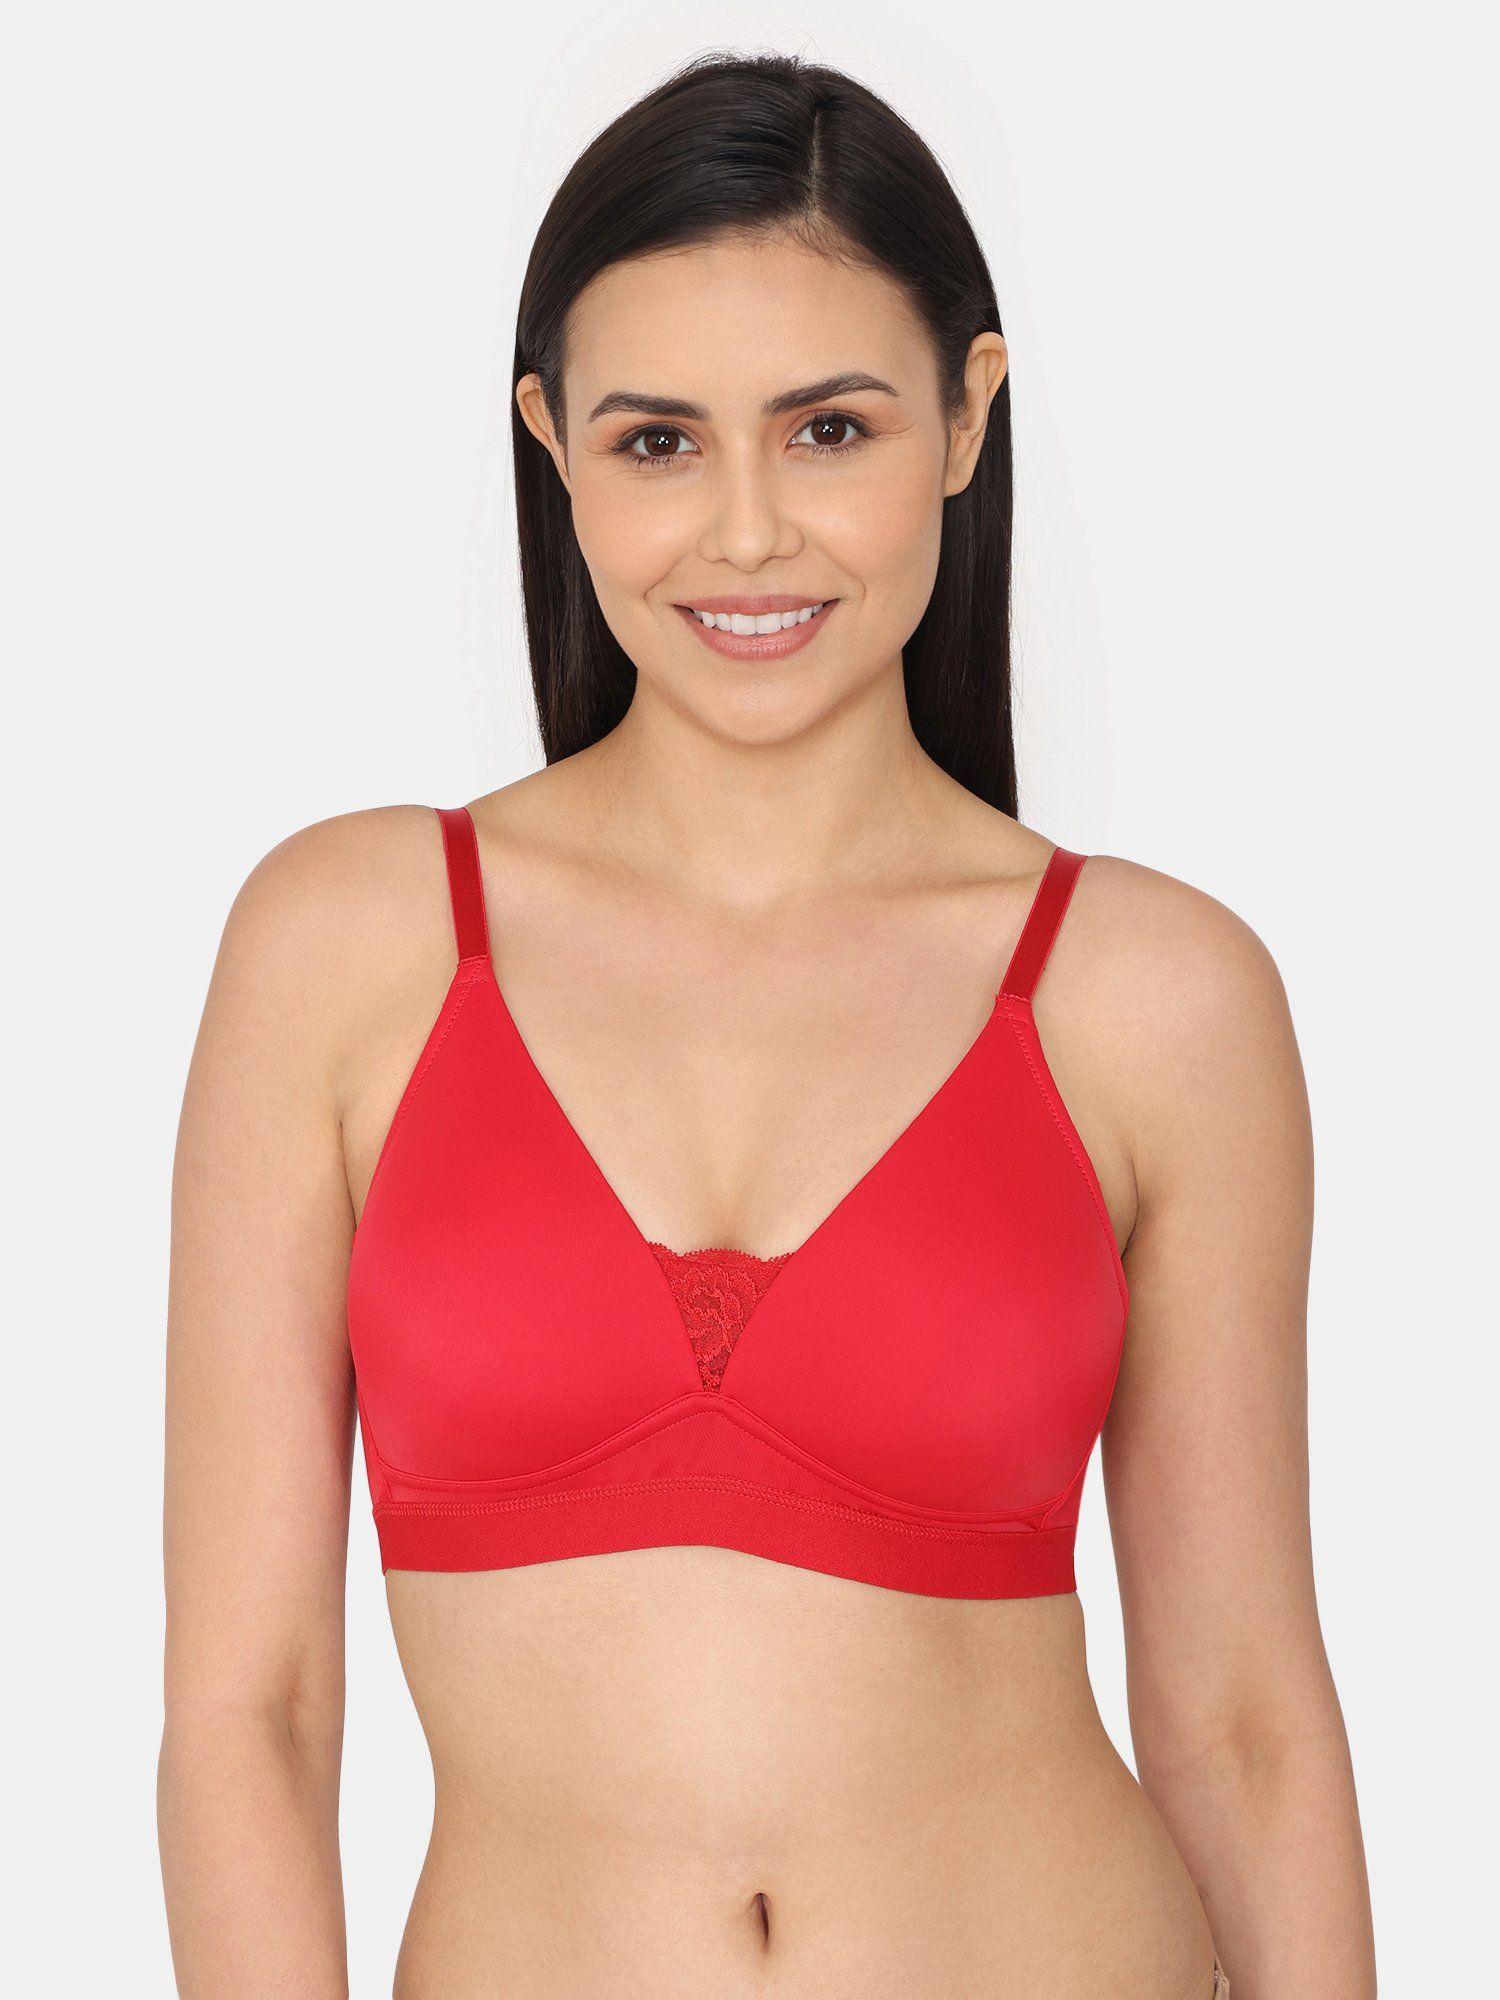 padded non wired 3-4th coverage t-shirt bra - barbados cherry